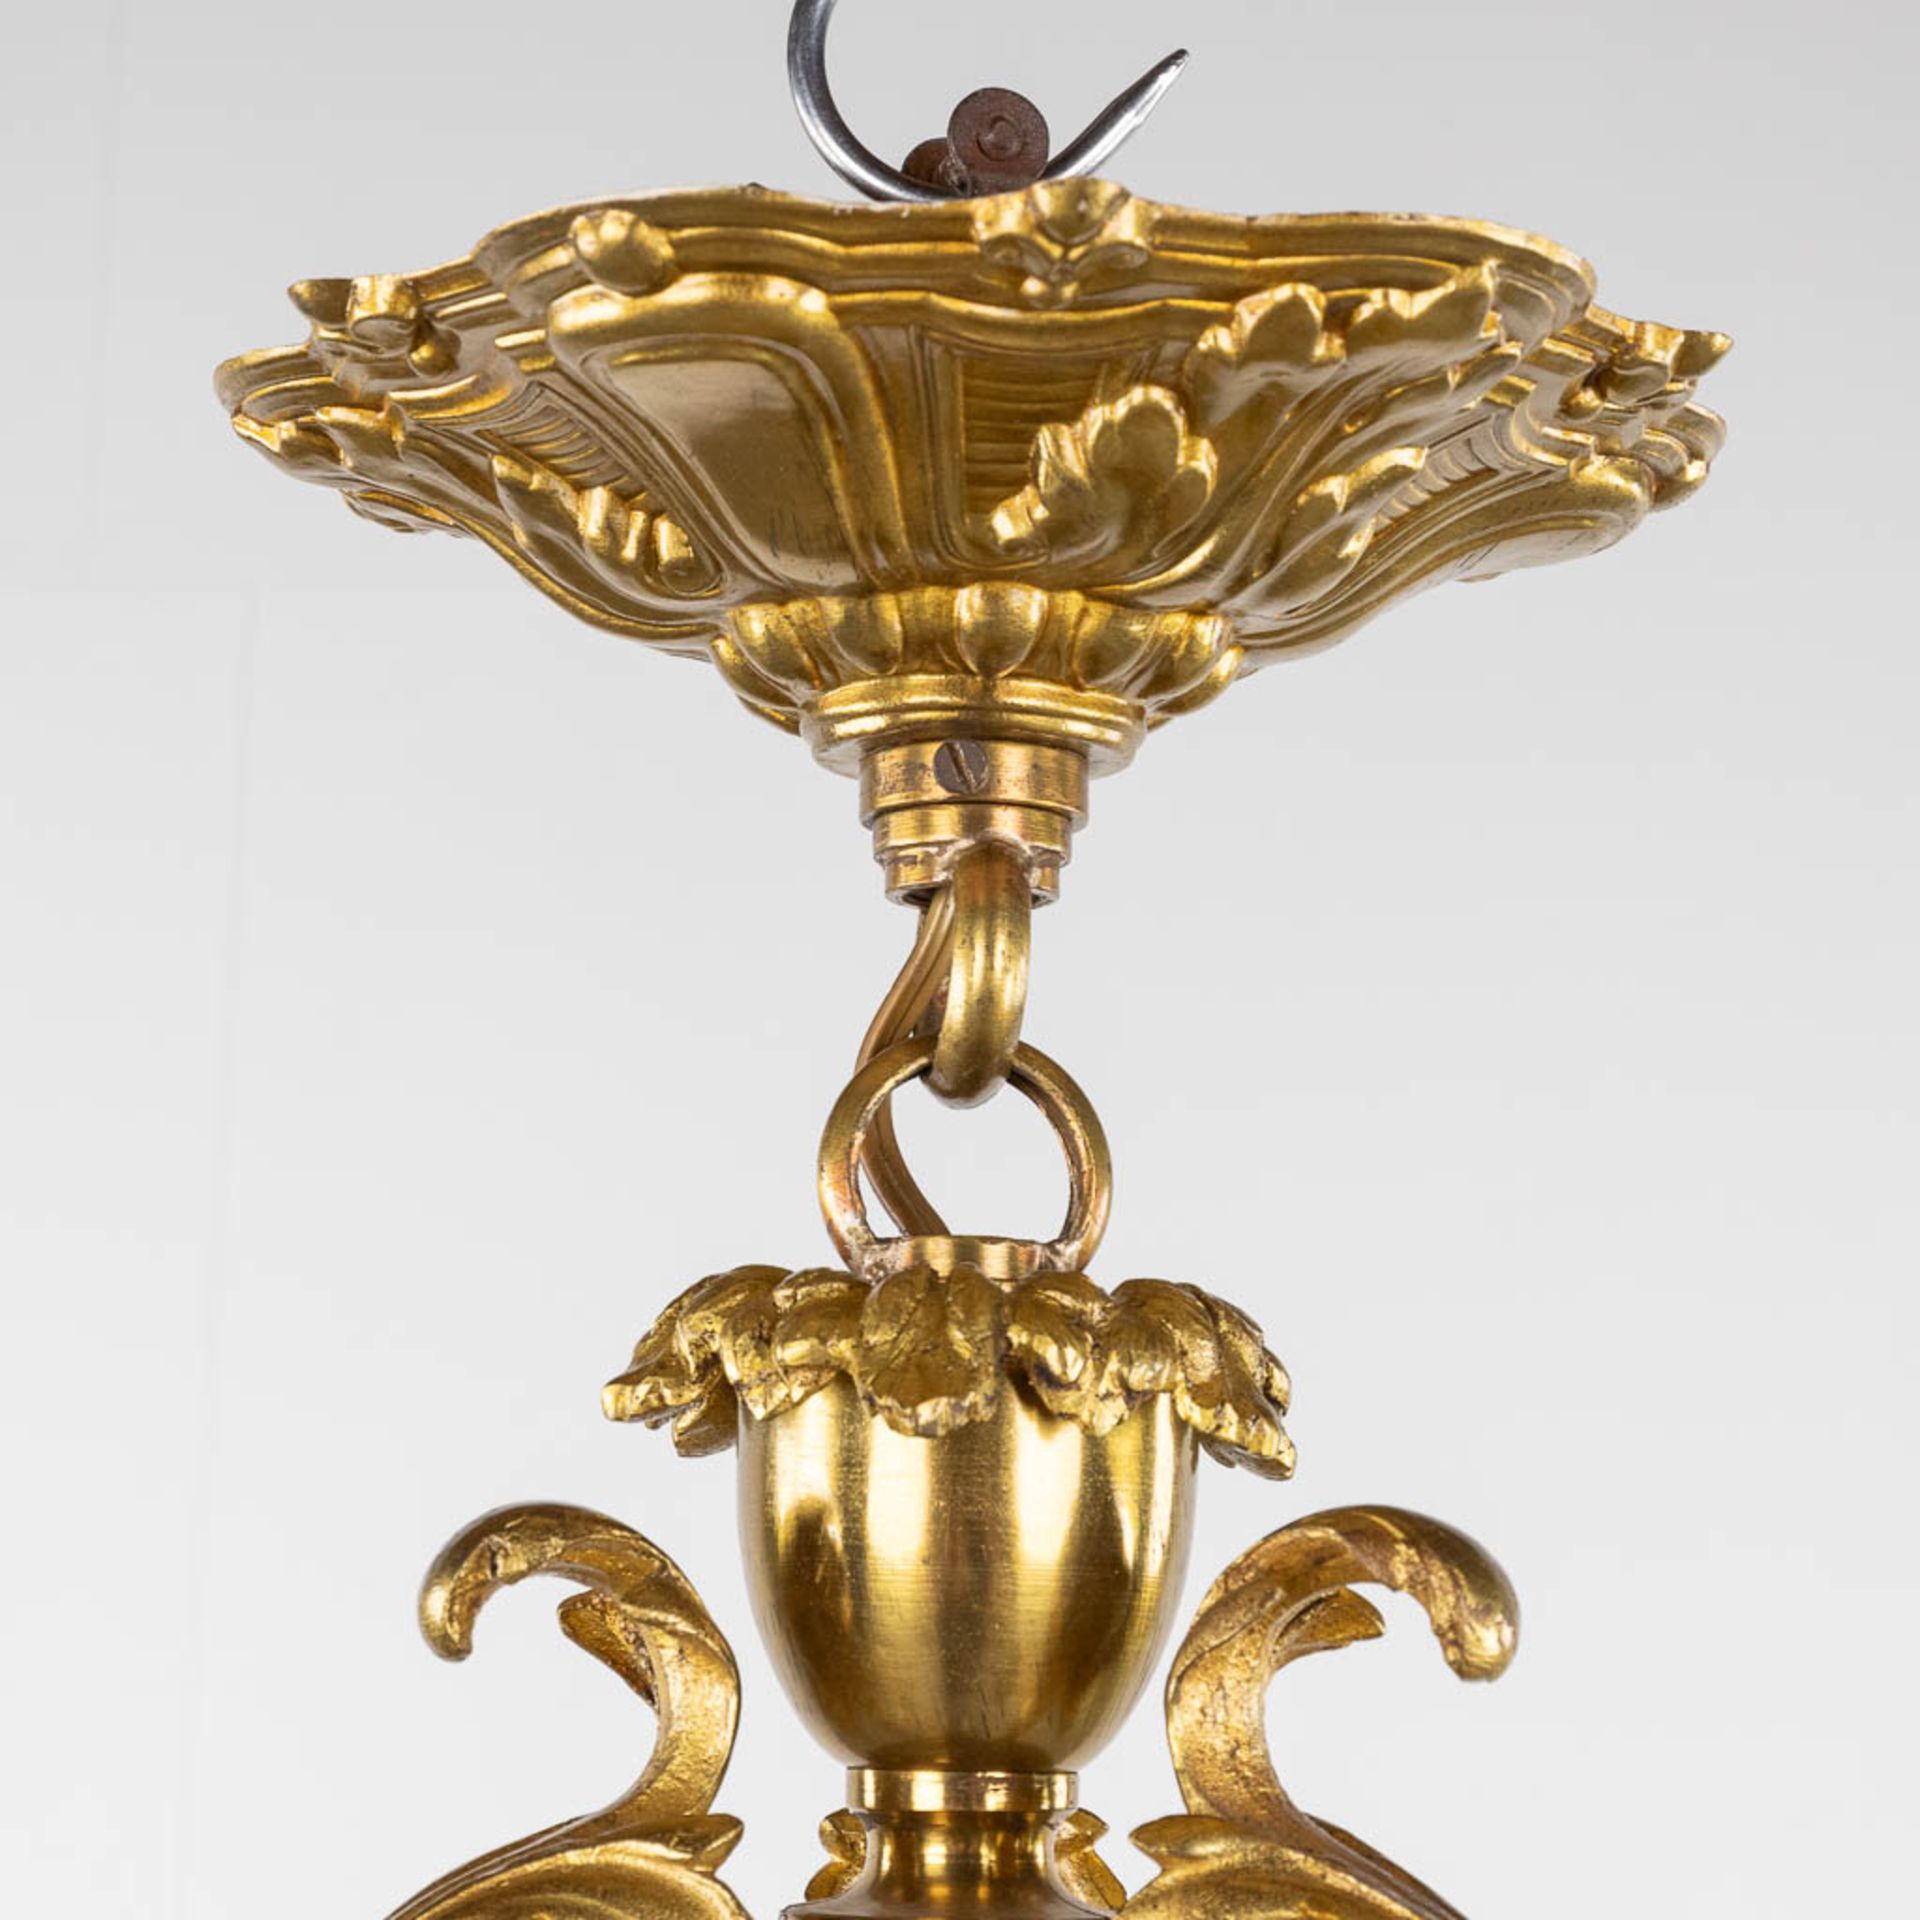 A chandelier, bronze with glass shades and a flambeau, decorated with Satyr figurines. (H:88 x D:54 - Image 4 of 13